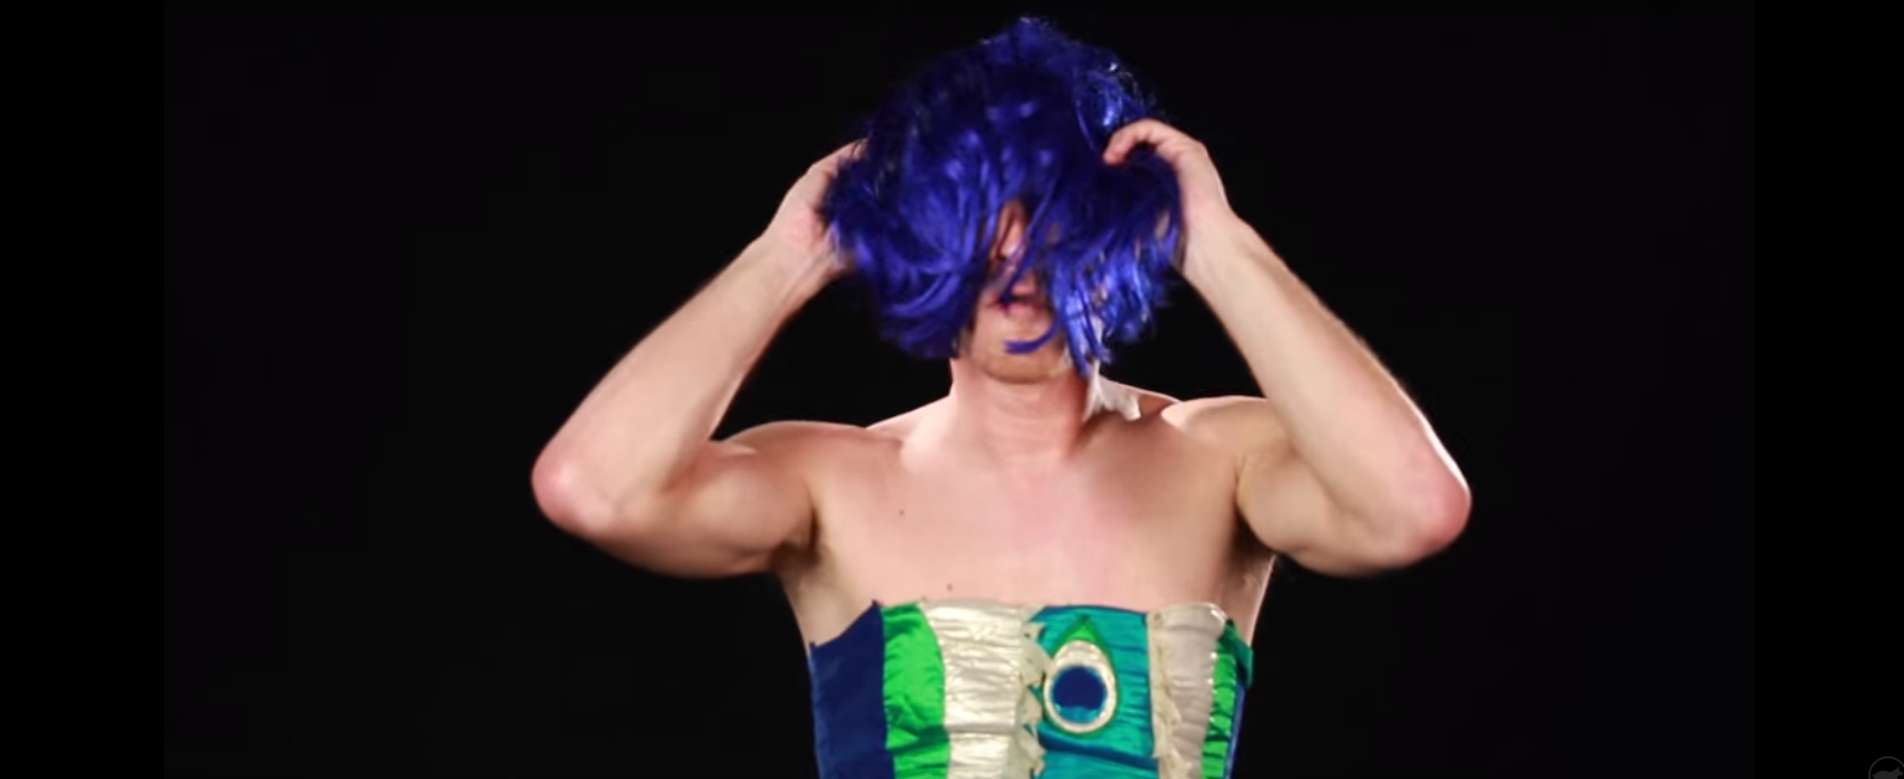 Boyfriends Try on Their Girlfriends’ Sexy Halloween Outfits